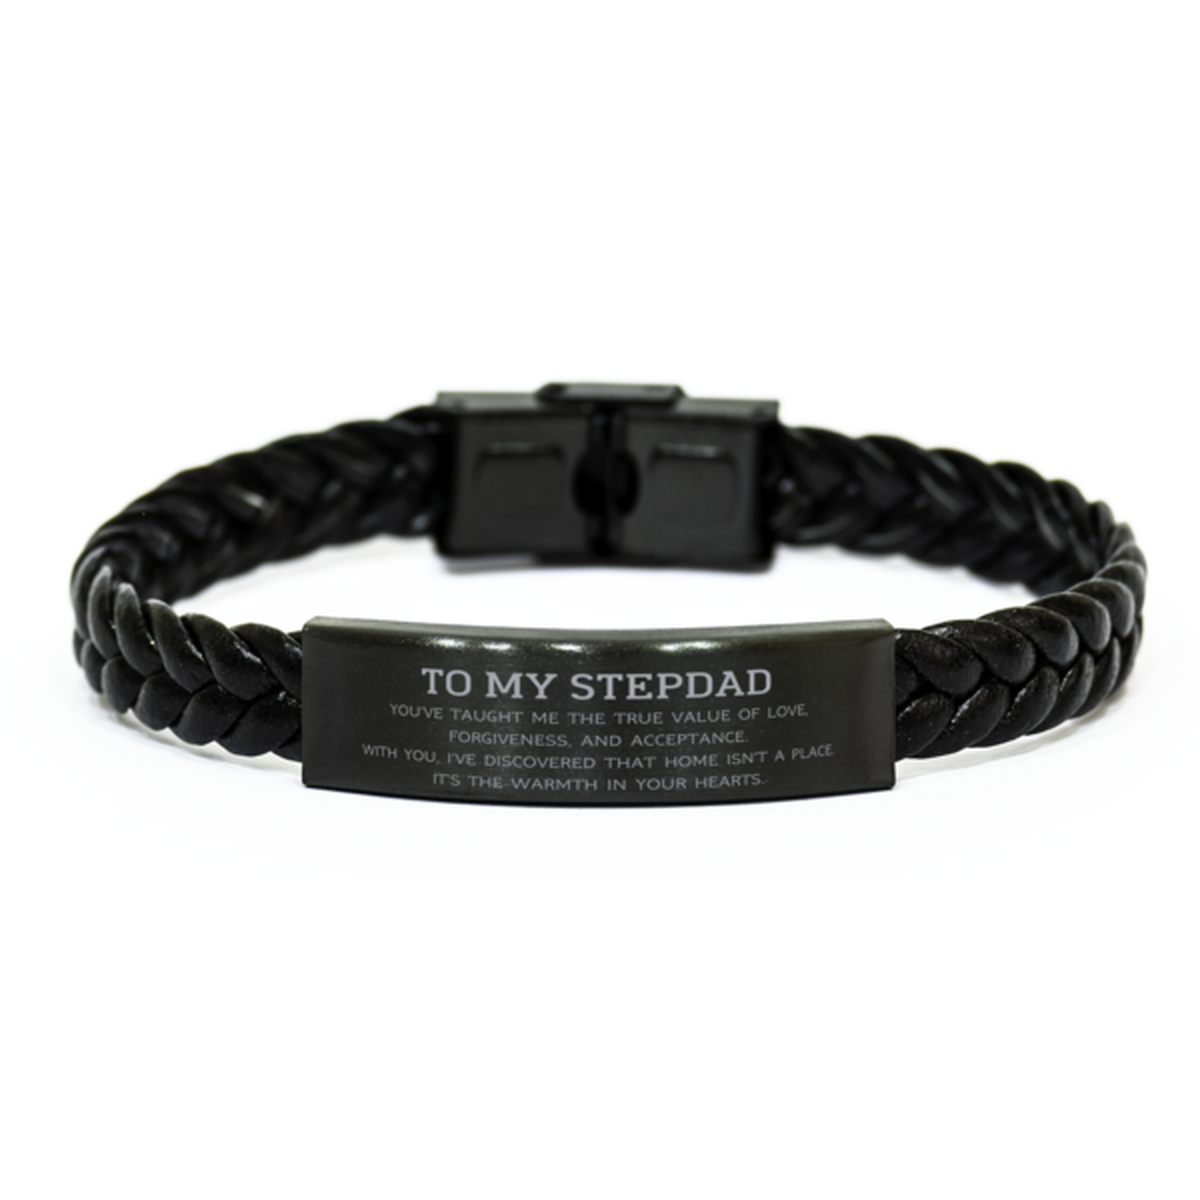 To My Stepdad Gifts, You've taught me the true value of love, Thank You Gifts For Stepdad, Birthday Braided Leather Bracelet For Stepdad